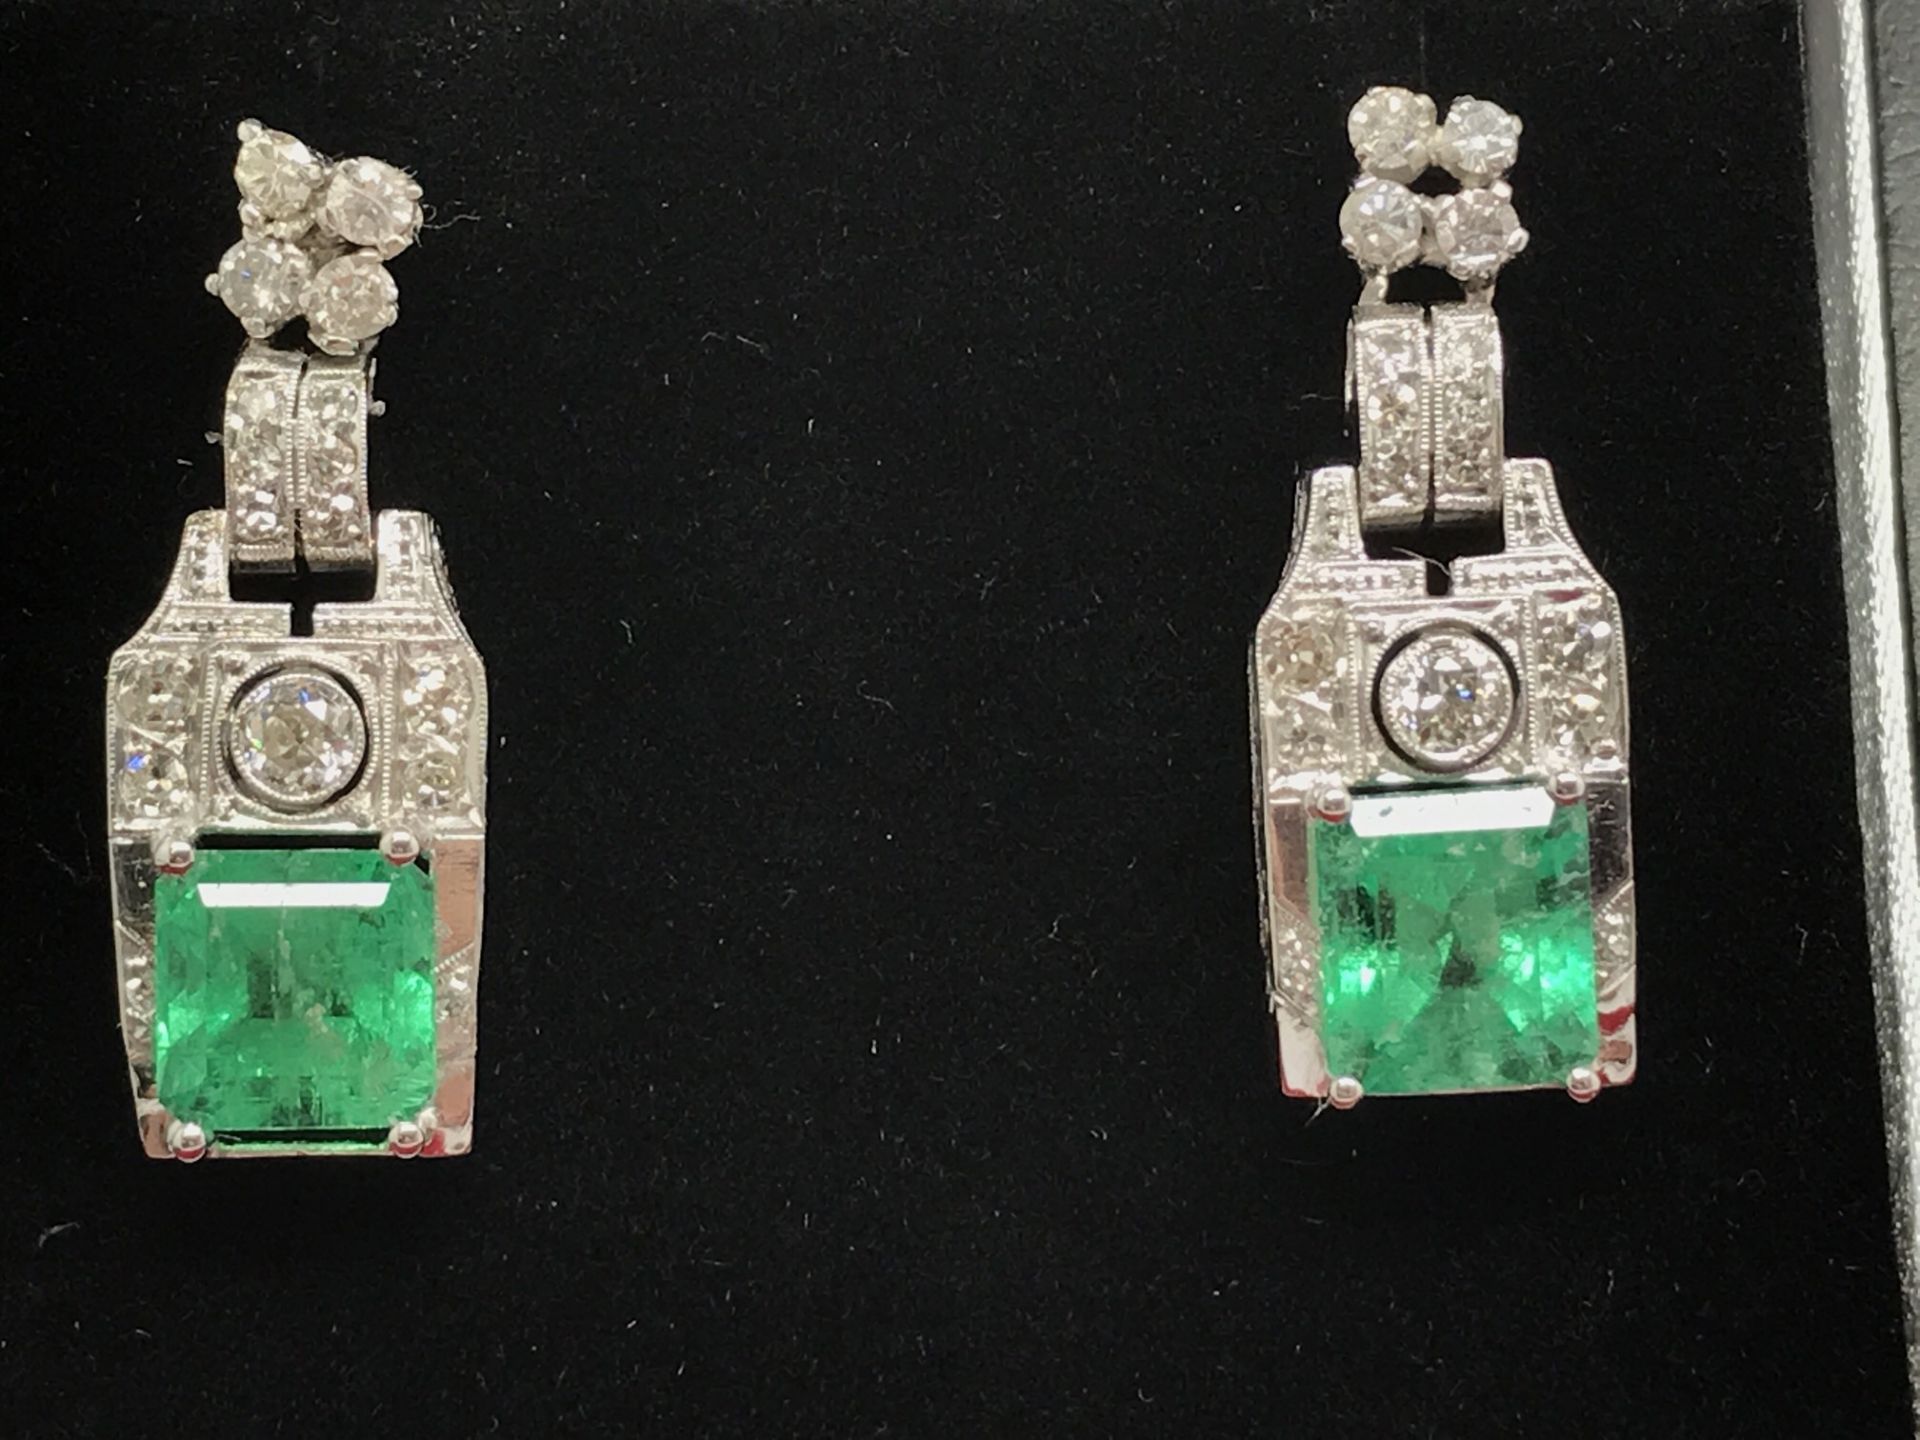 5.50cts COLOMBIAN EMERALD & DIAMOND EARRINGS SET IN WHITE METAL TESTED AS PLATINUM - Image 7 of 7